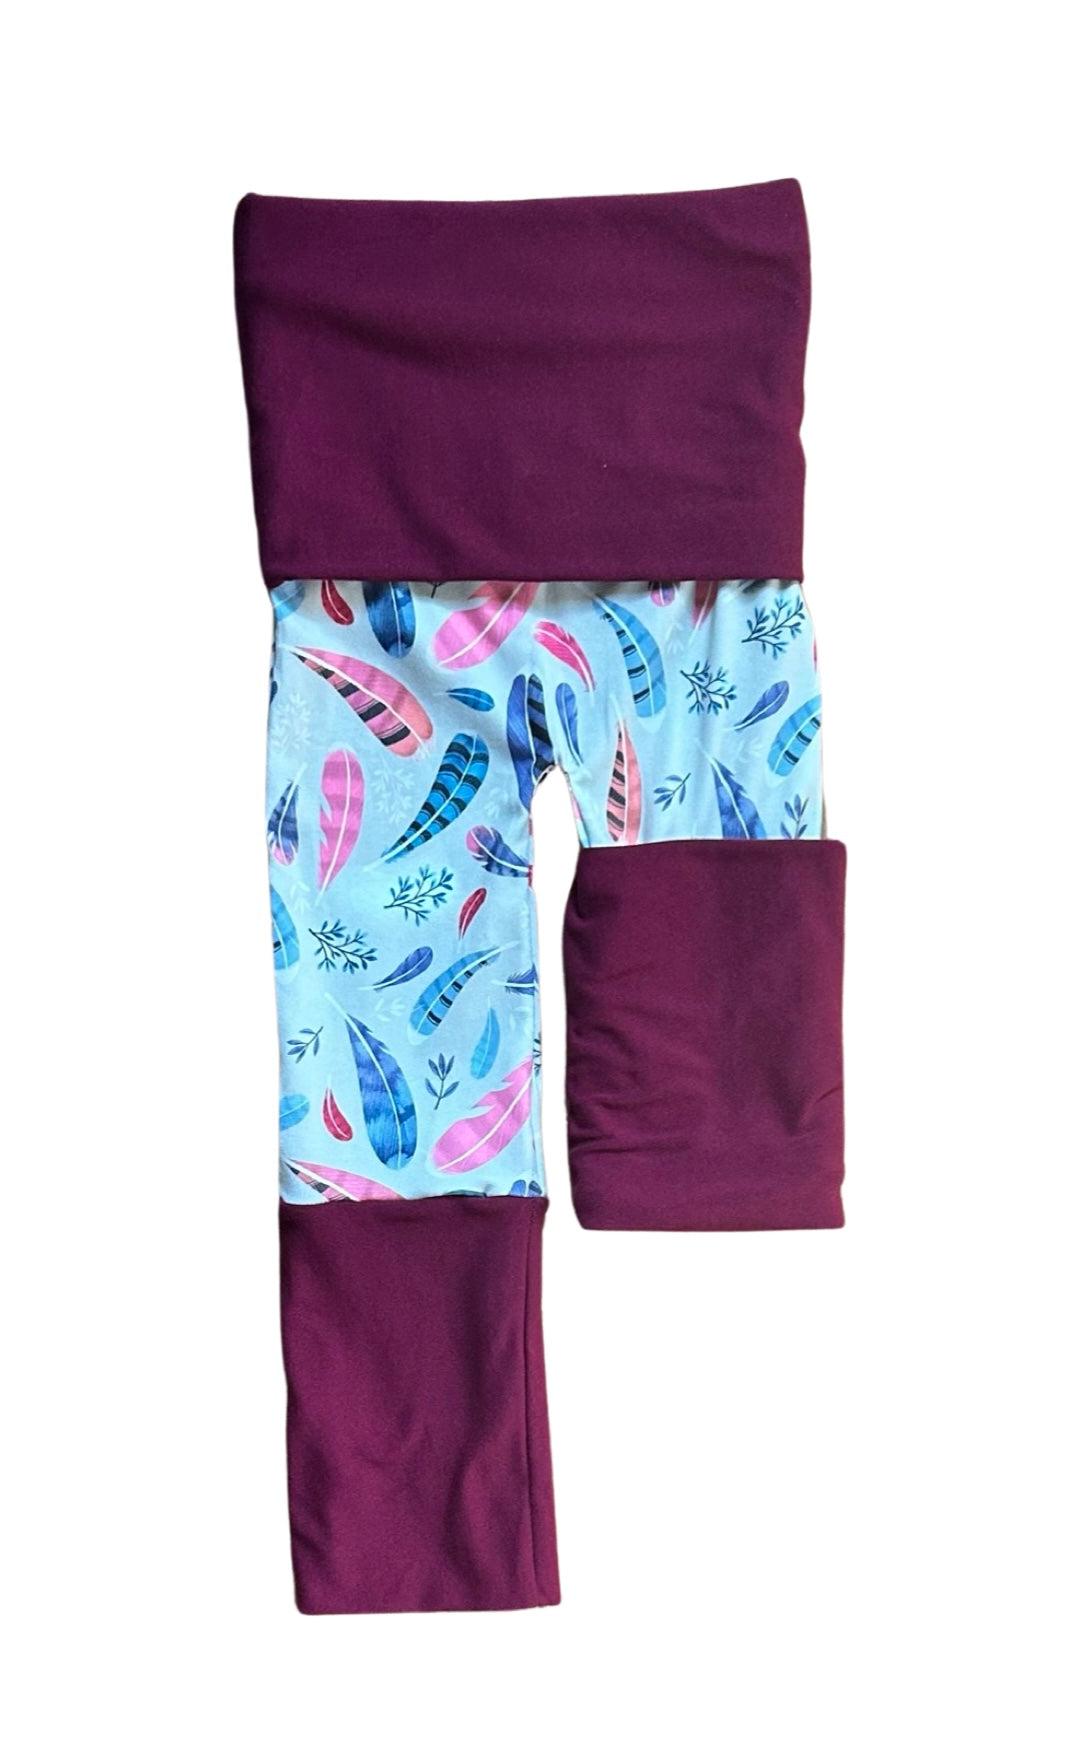 Adjustable Pants - Feathers with Wine